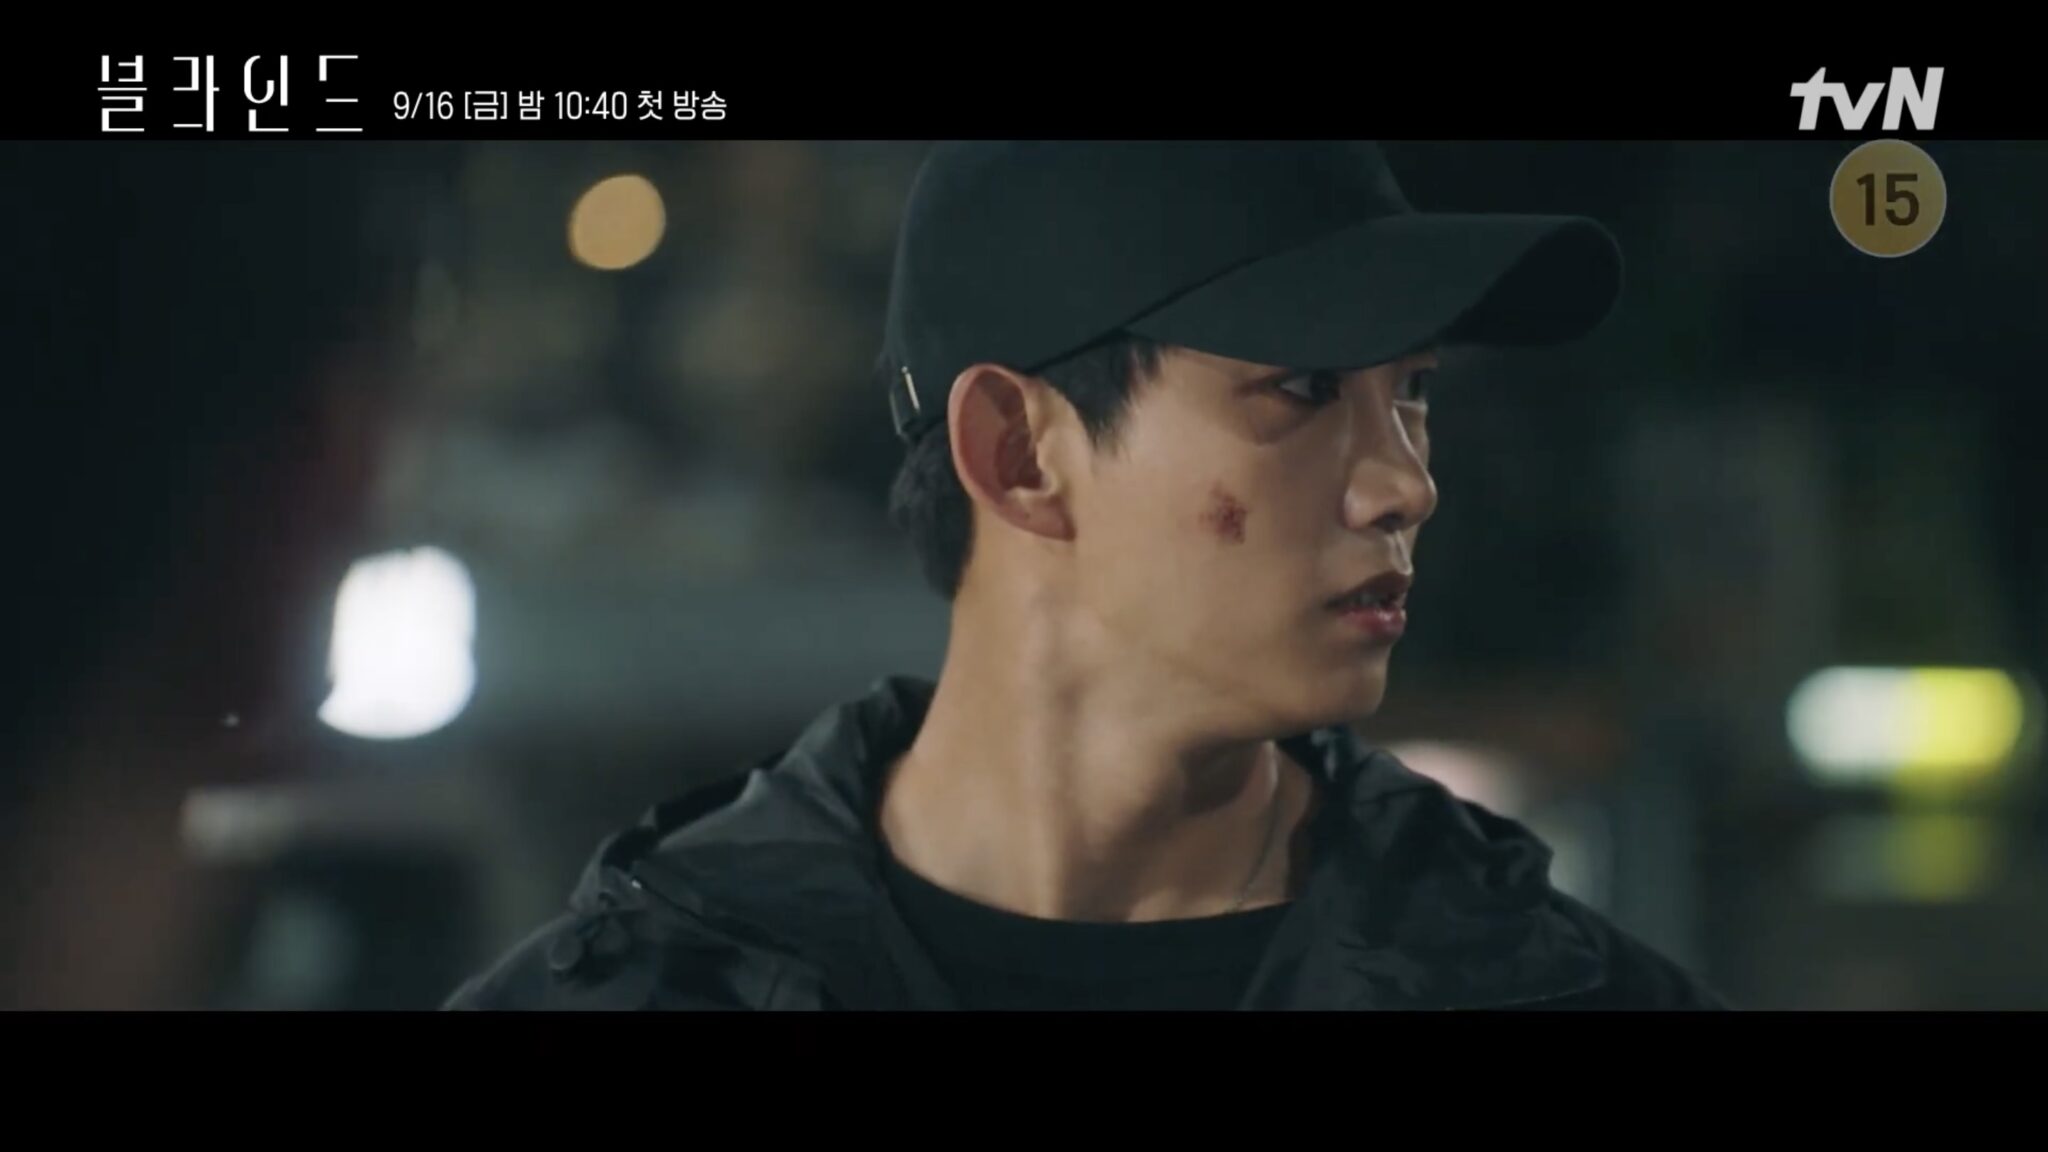 Ha Suk-jin suspects Taecyeon in new teasers for tvN's Blind